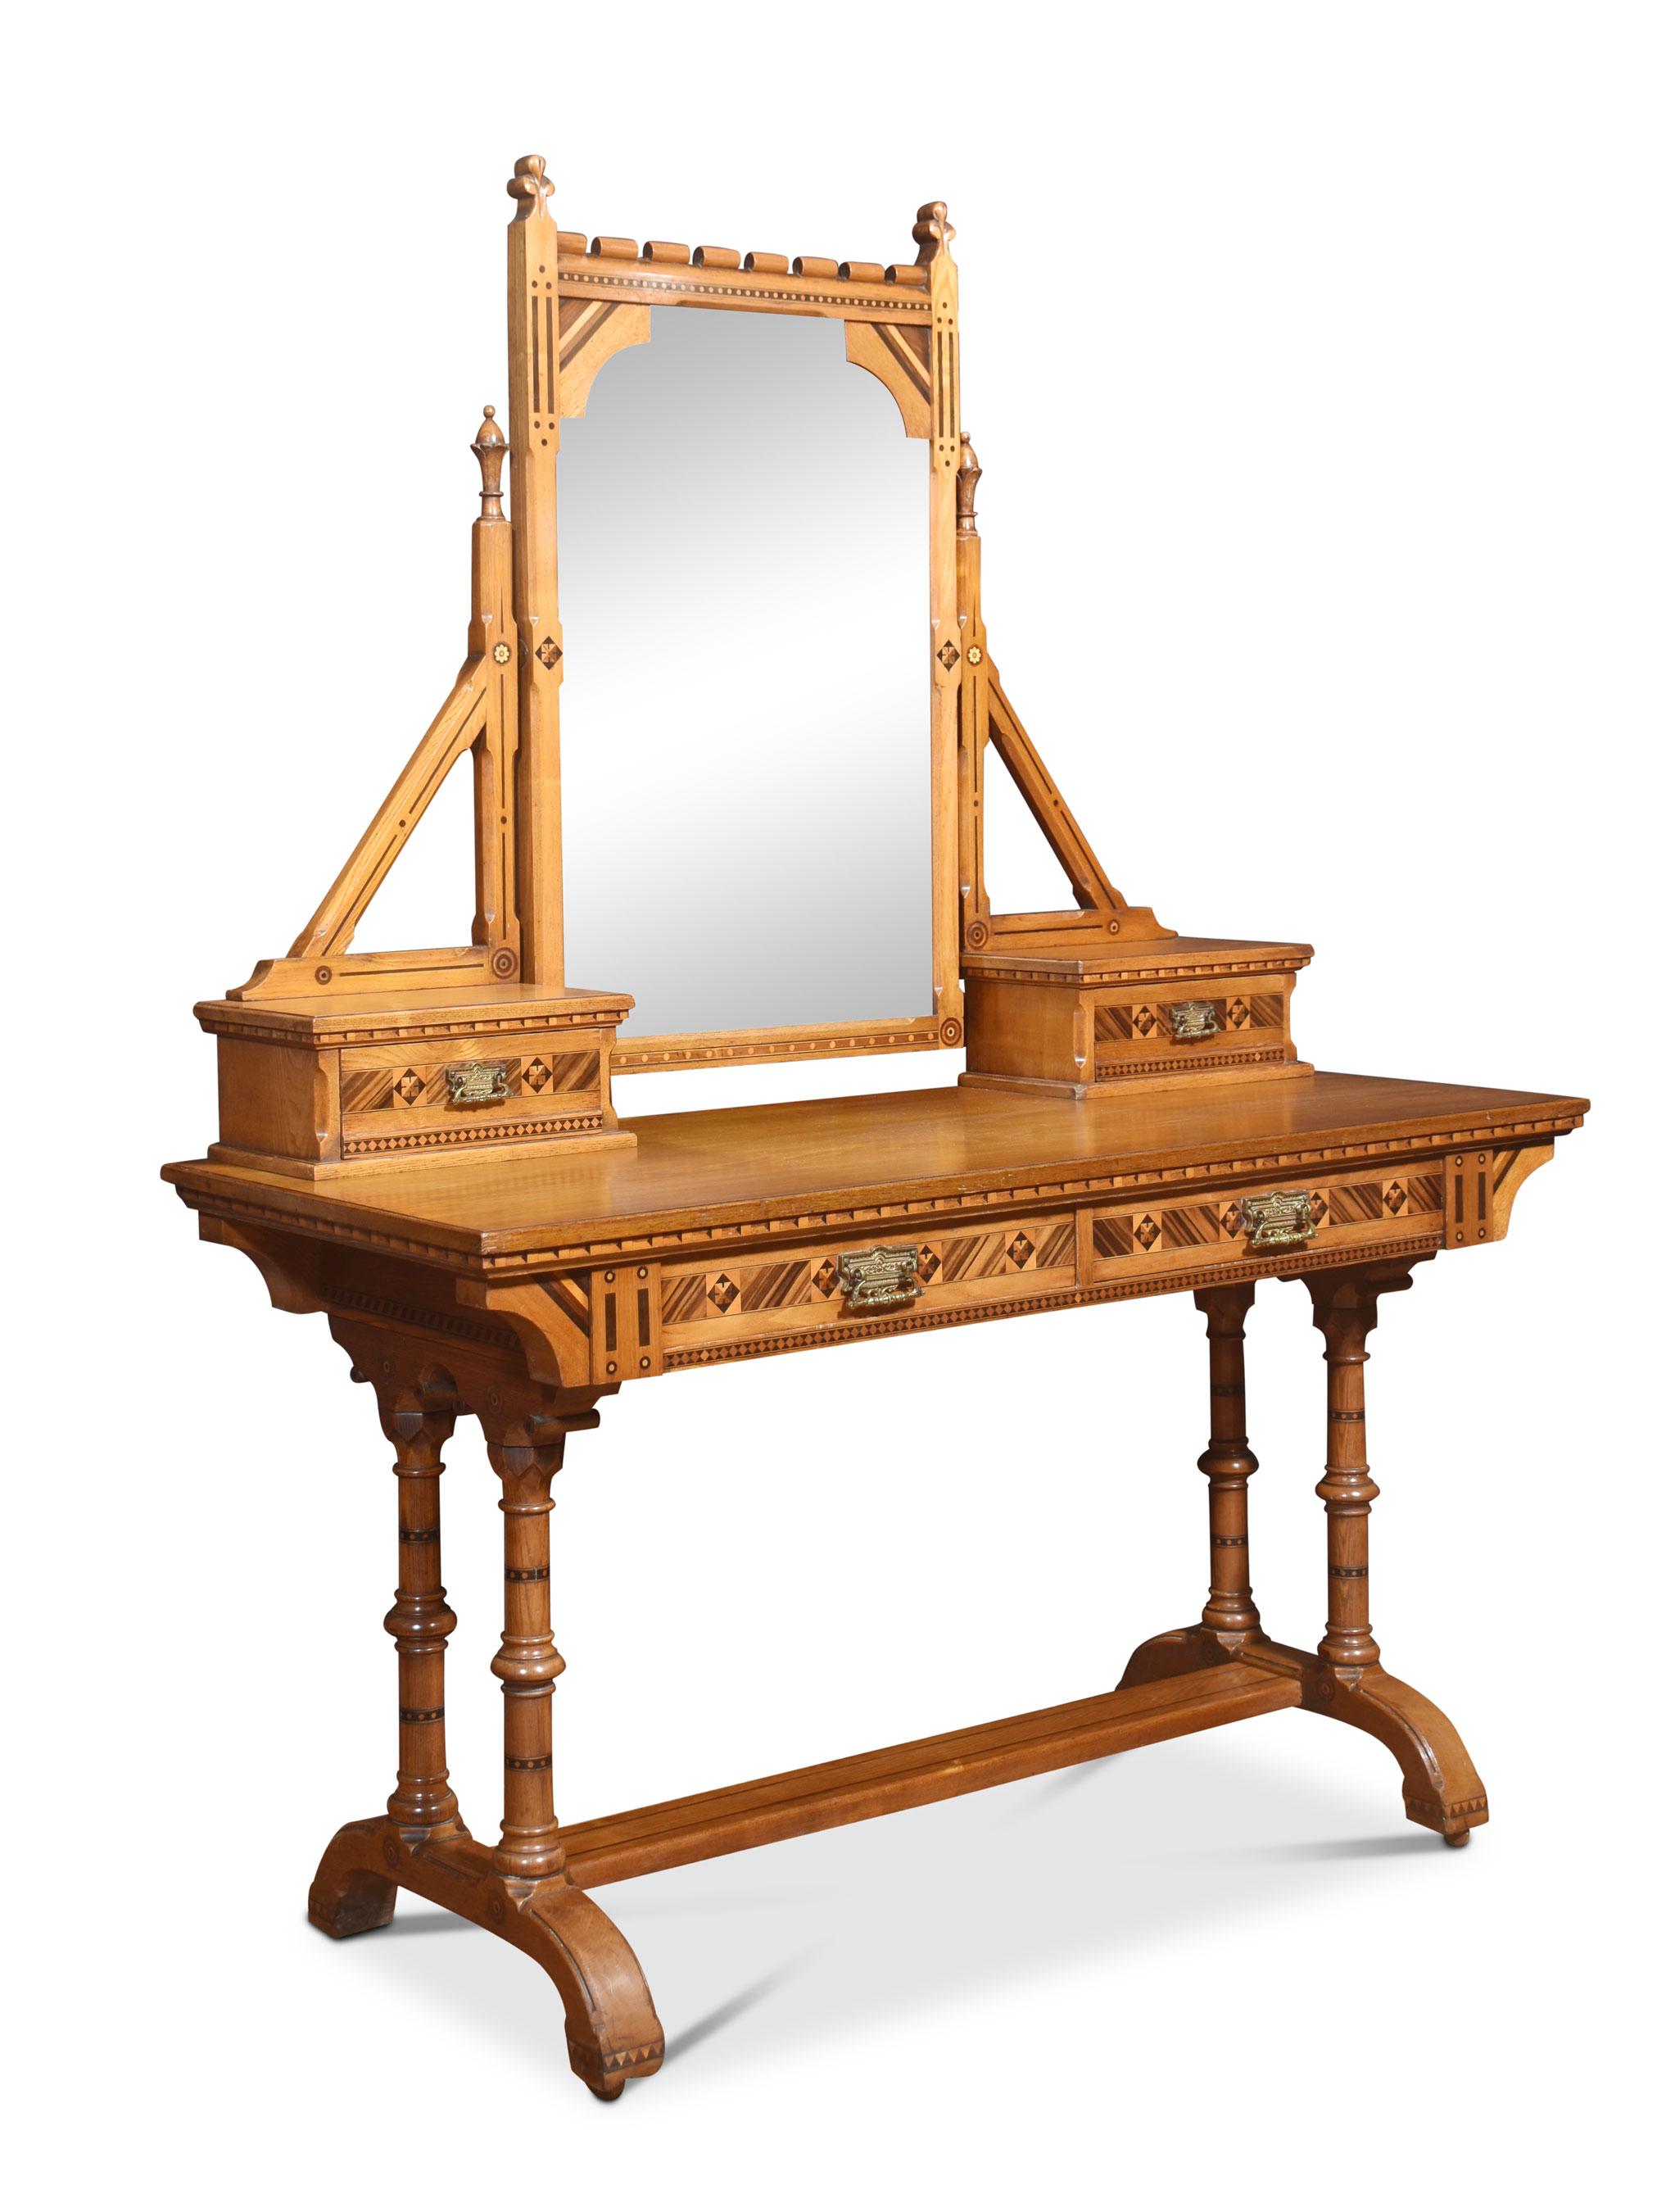 Aesthetic movement ash dressing table with ebonised detail. The central adjustable mirror supported on architectural supports above short drawers. To the rectangular top with inlaid frieze having two drawers with stylised brass handles. All raised